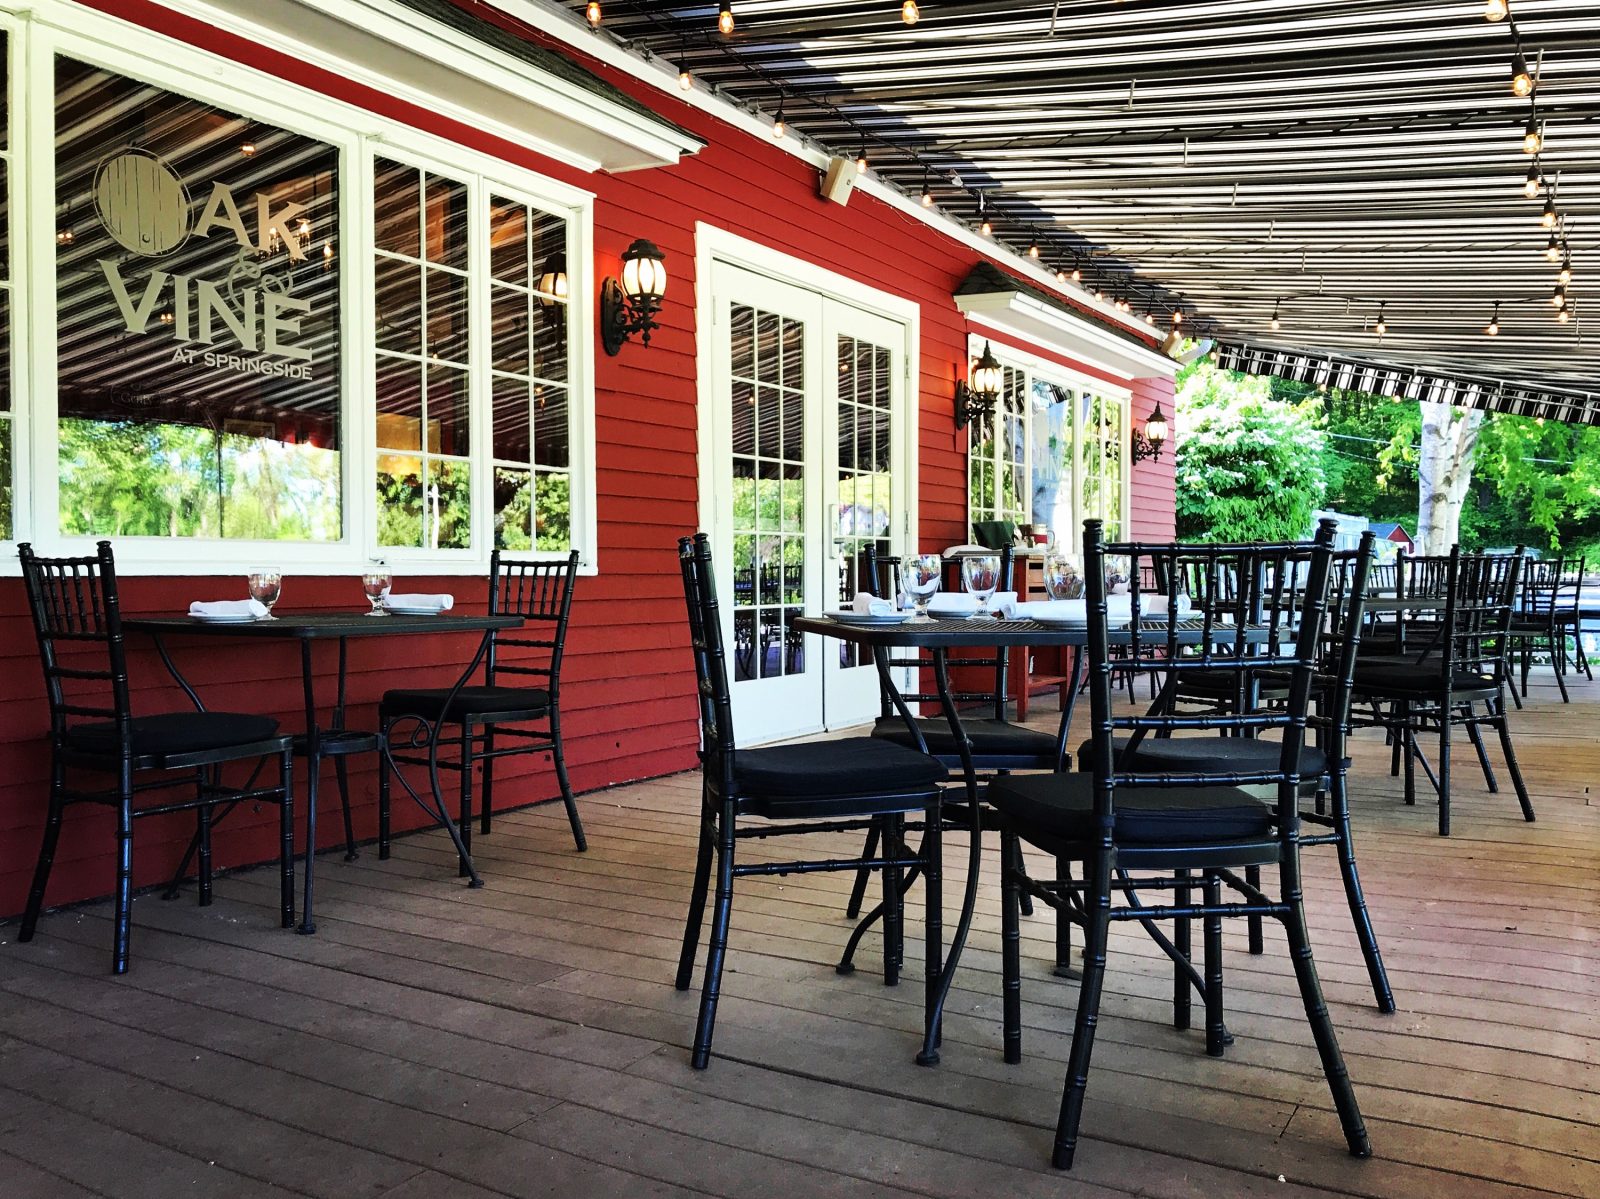 String lights line the Oak and Vine patio awning